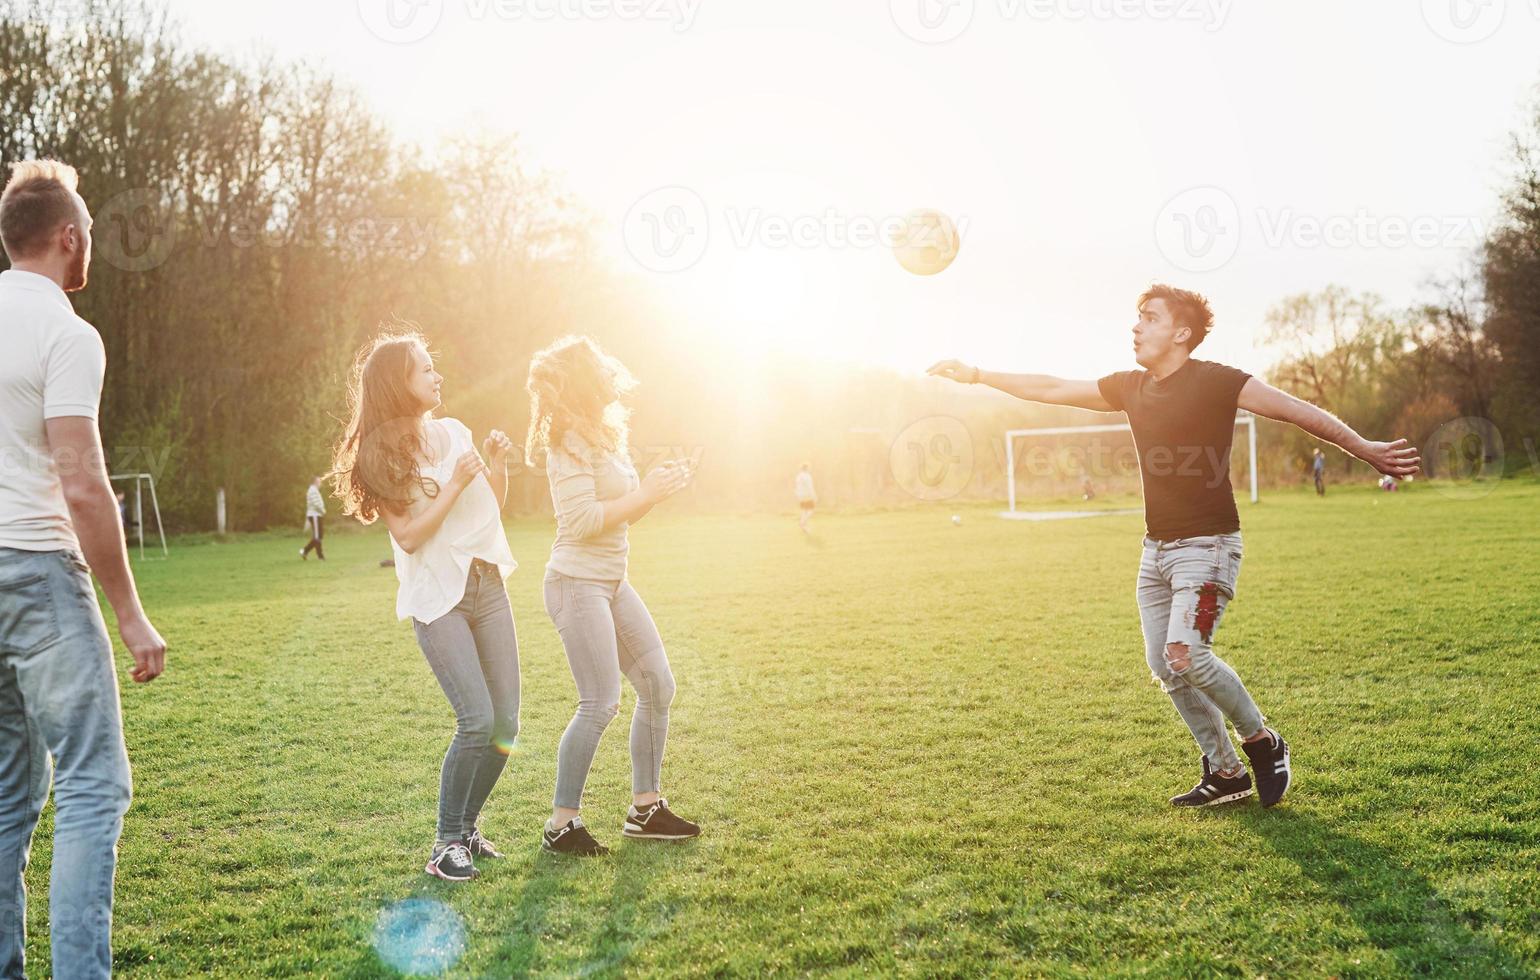 A group of friends in casual outfit play soccer in the open air. People have fun and have fun. Active rest and scenic sunset. photo